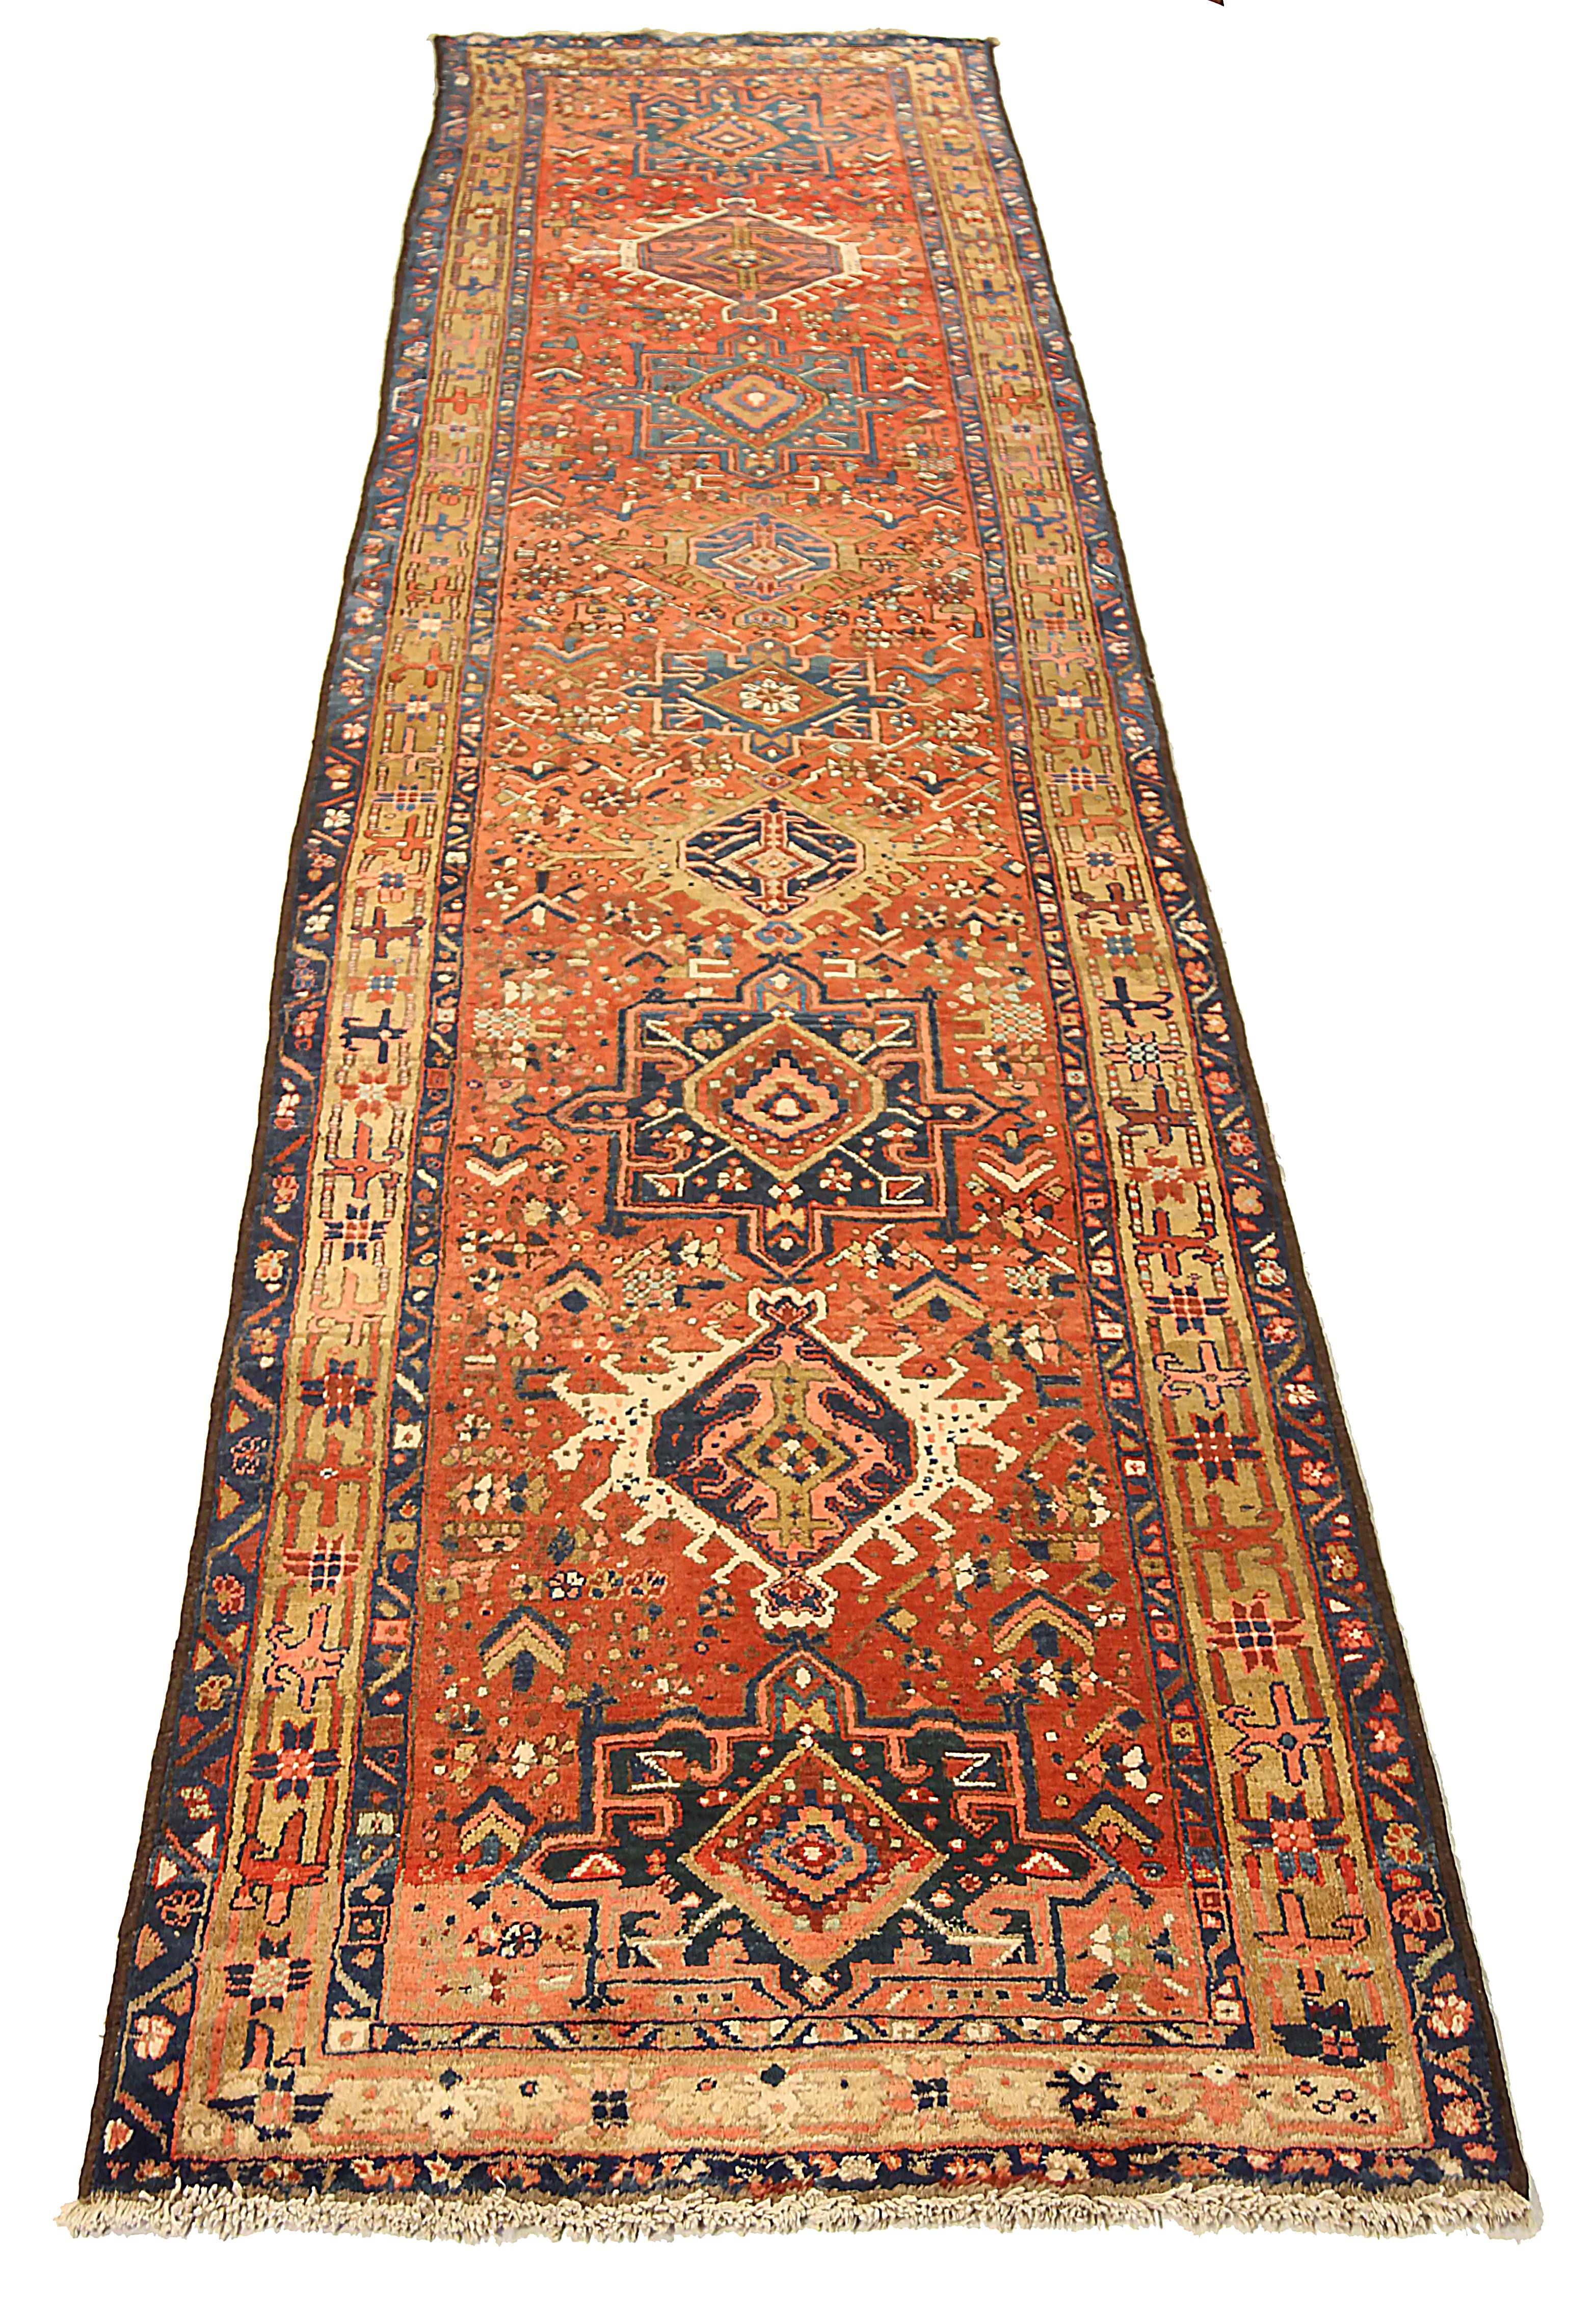 Antique Persian runner rug handwoven from the finest sheep’s wool. It’s colored with all-natural vegetable dyes that are safe for humans and pets. It’s a traditional Karajeh design handwoven by expert artisans. It’s a lovely runner rug that can be